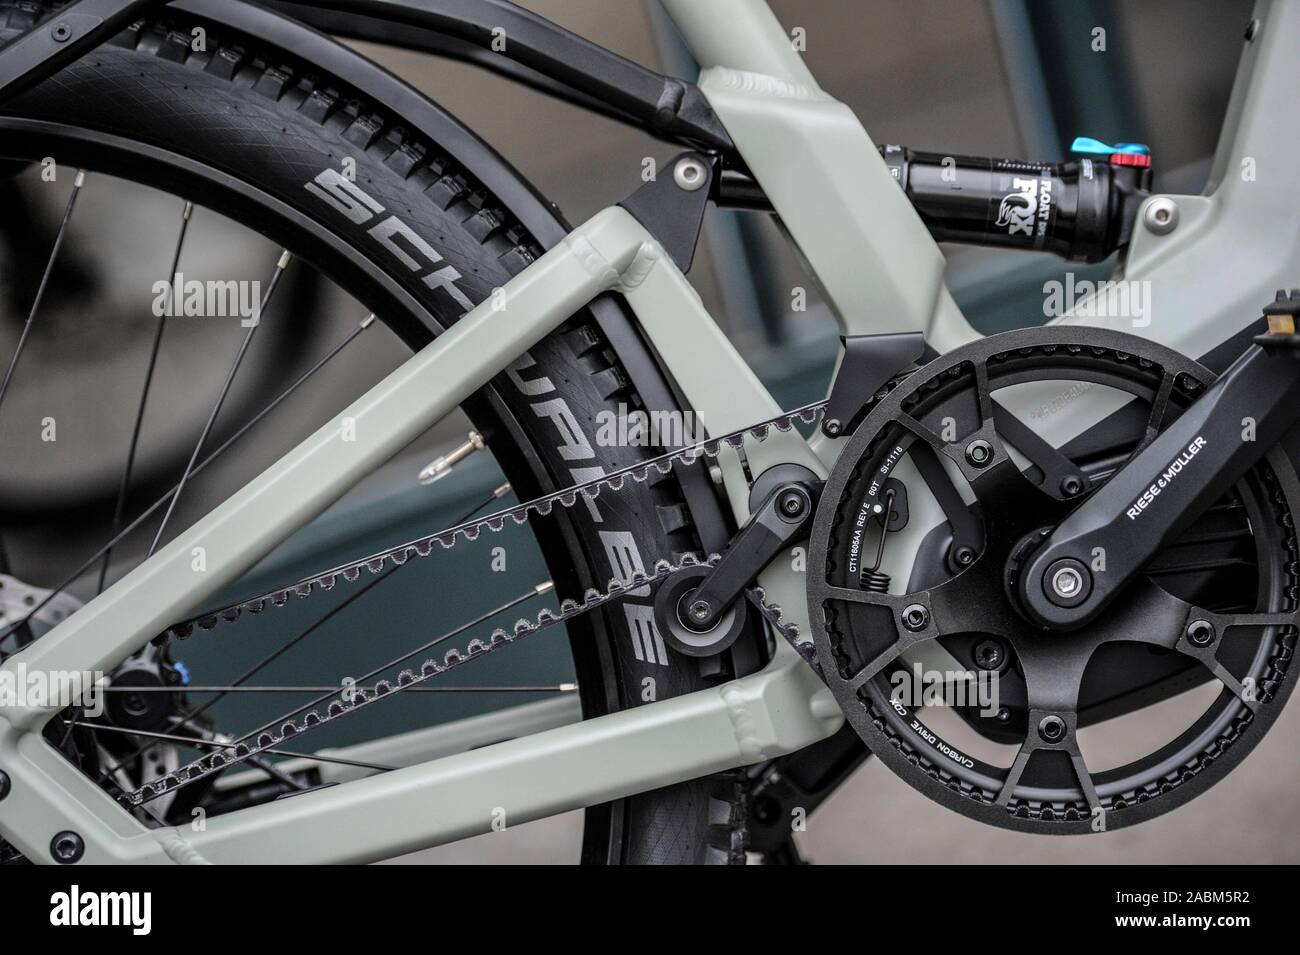 The high-end E-Bike Superdelite GT Rohloff HS of the manufacturer Riese und  Müller with two batteries, which offers a motor support up to a maximum of  45 kilometers per hour. pressedienst-fahrrad GmbH